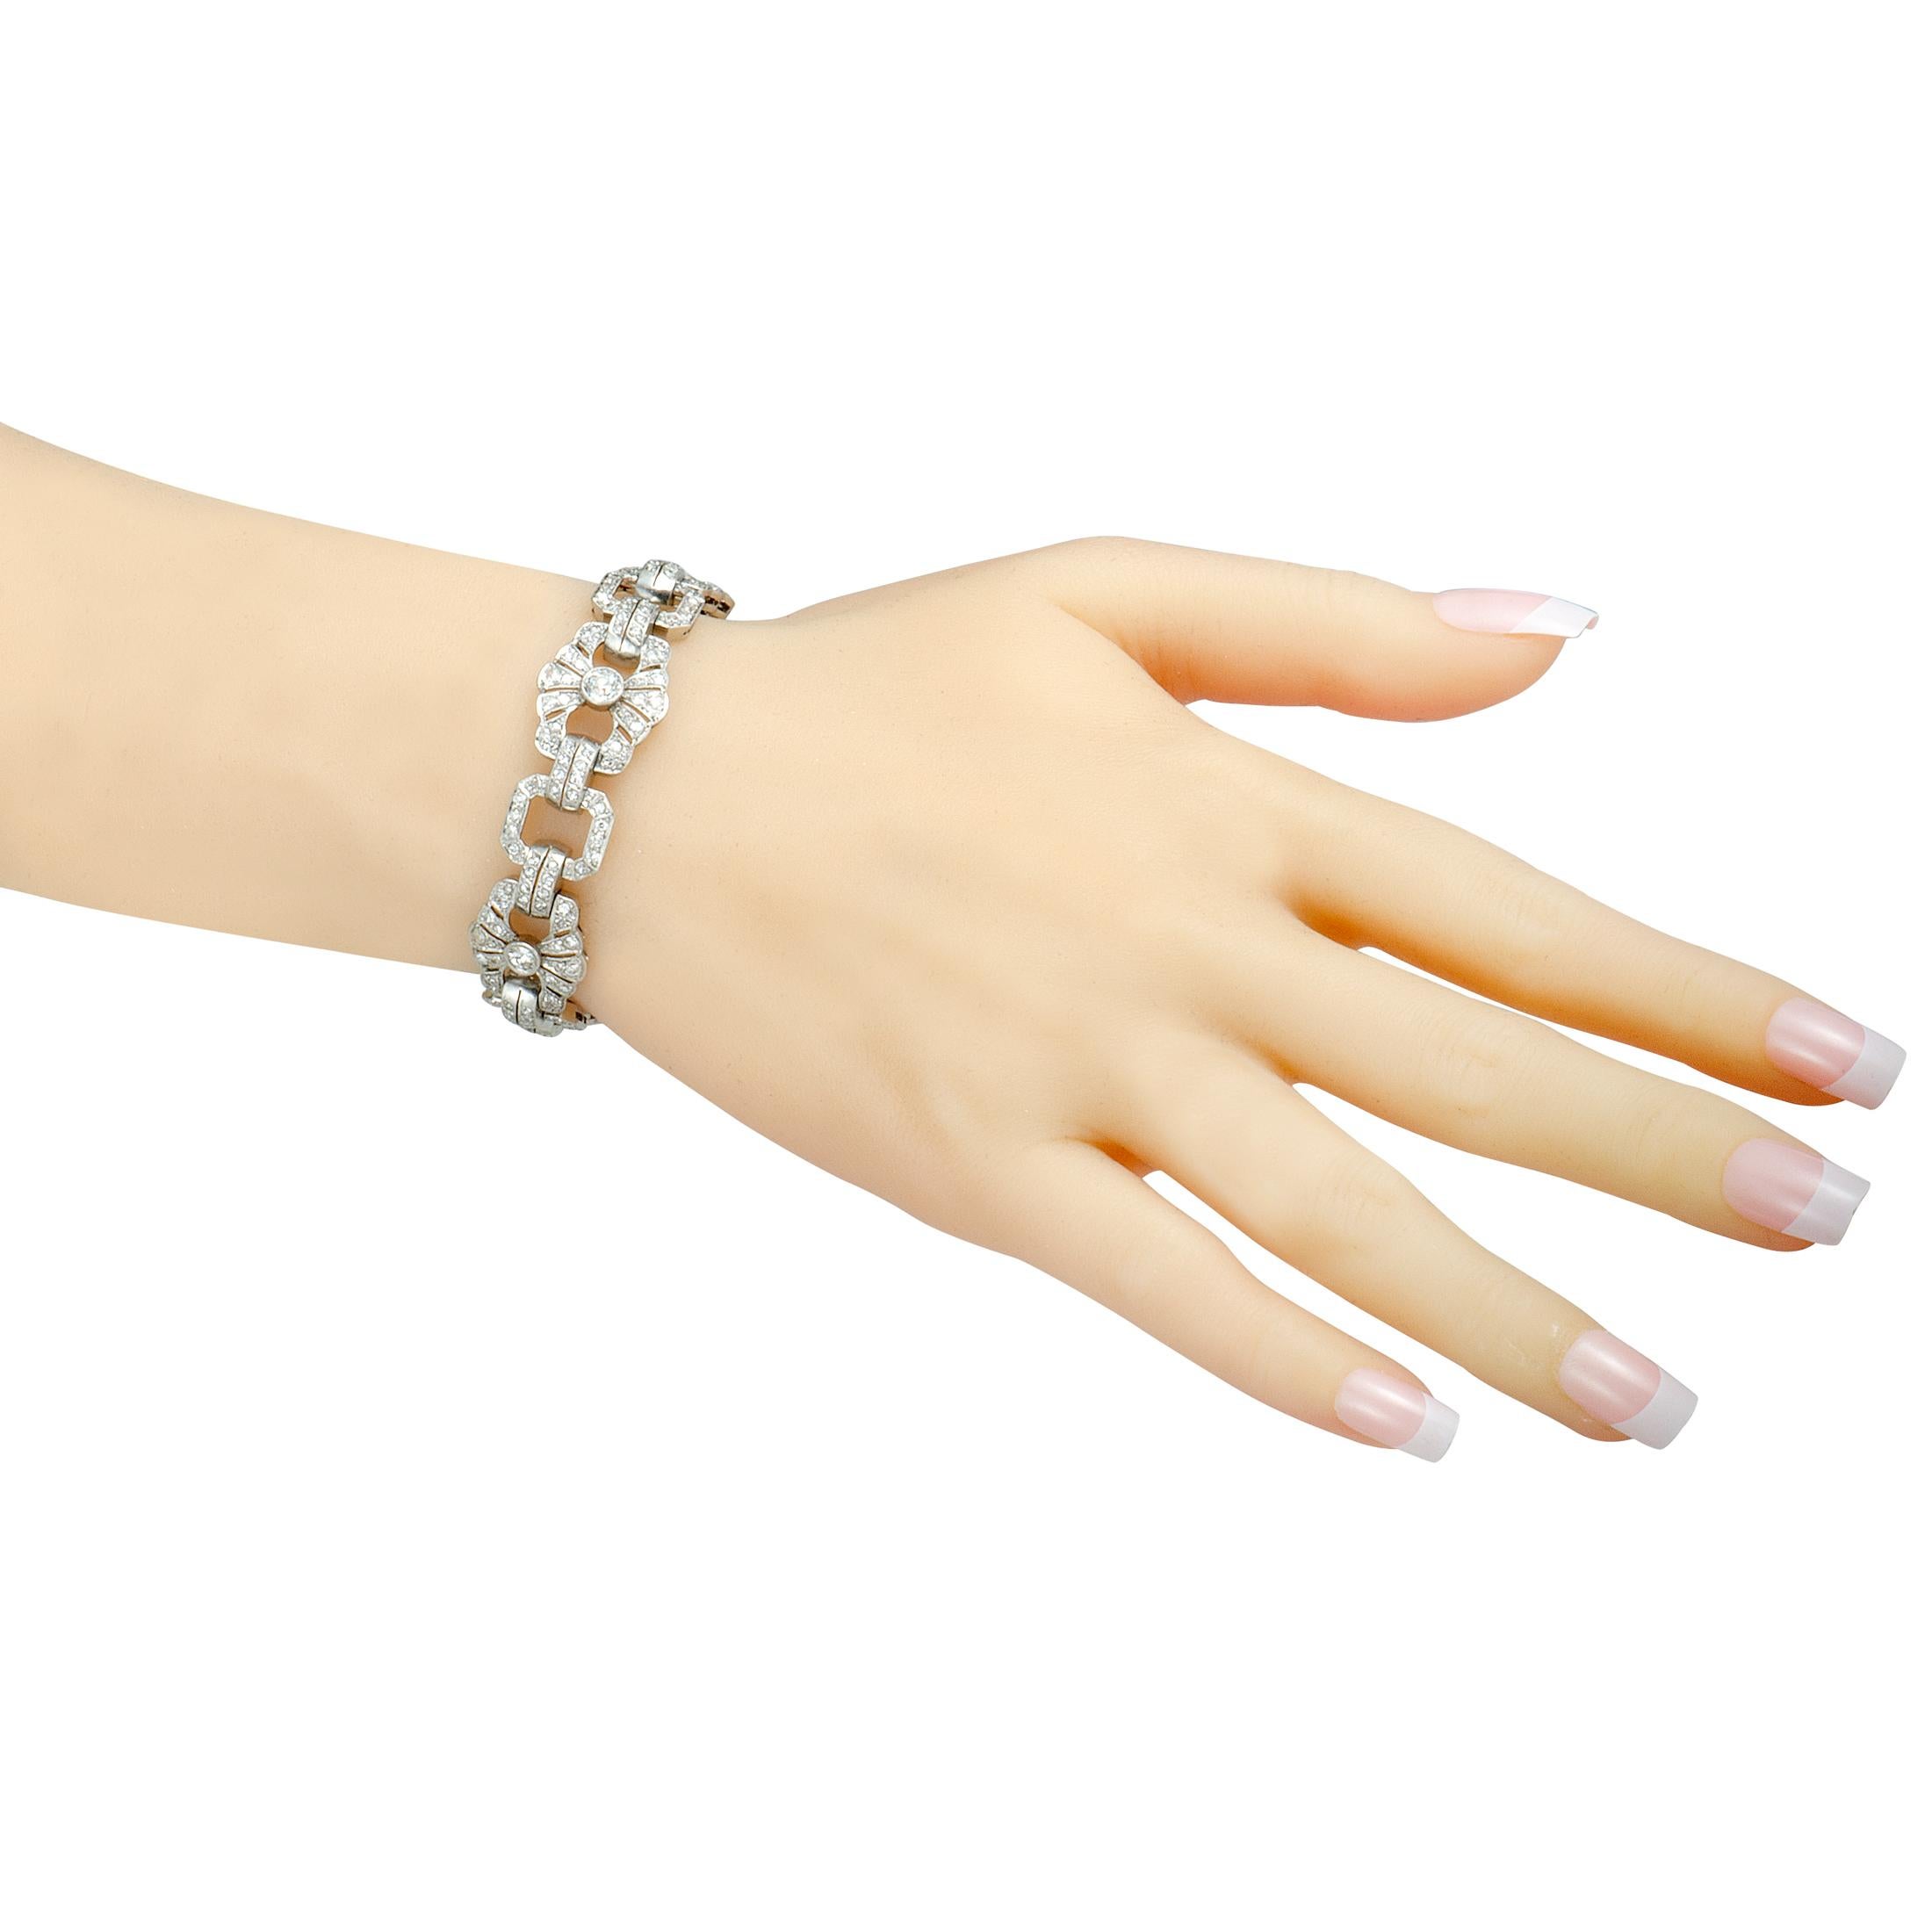 Extravagance embodied, this fabulous bracelet will make any outfit of yours a standout ensemble, thanks to the exceptionally refined design and stunningly lustrous diamond décor. The bracelet is expertly made of platinum and it is set with a total